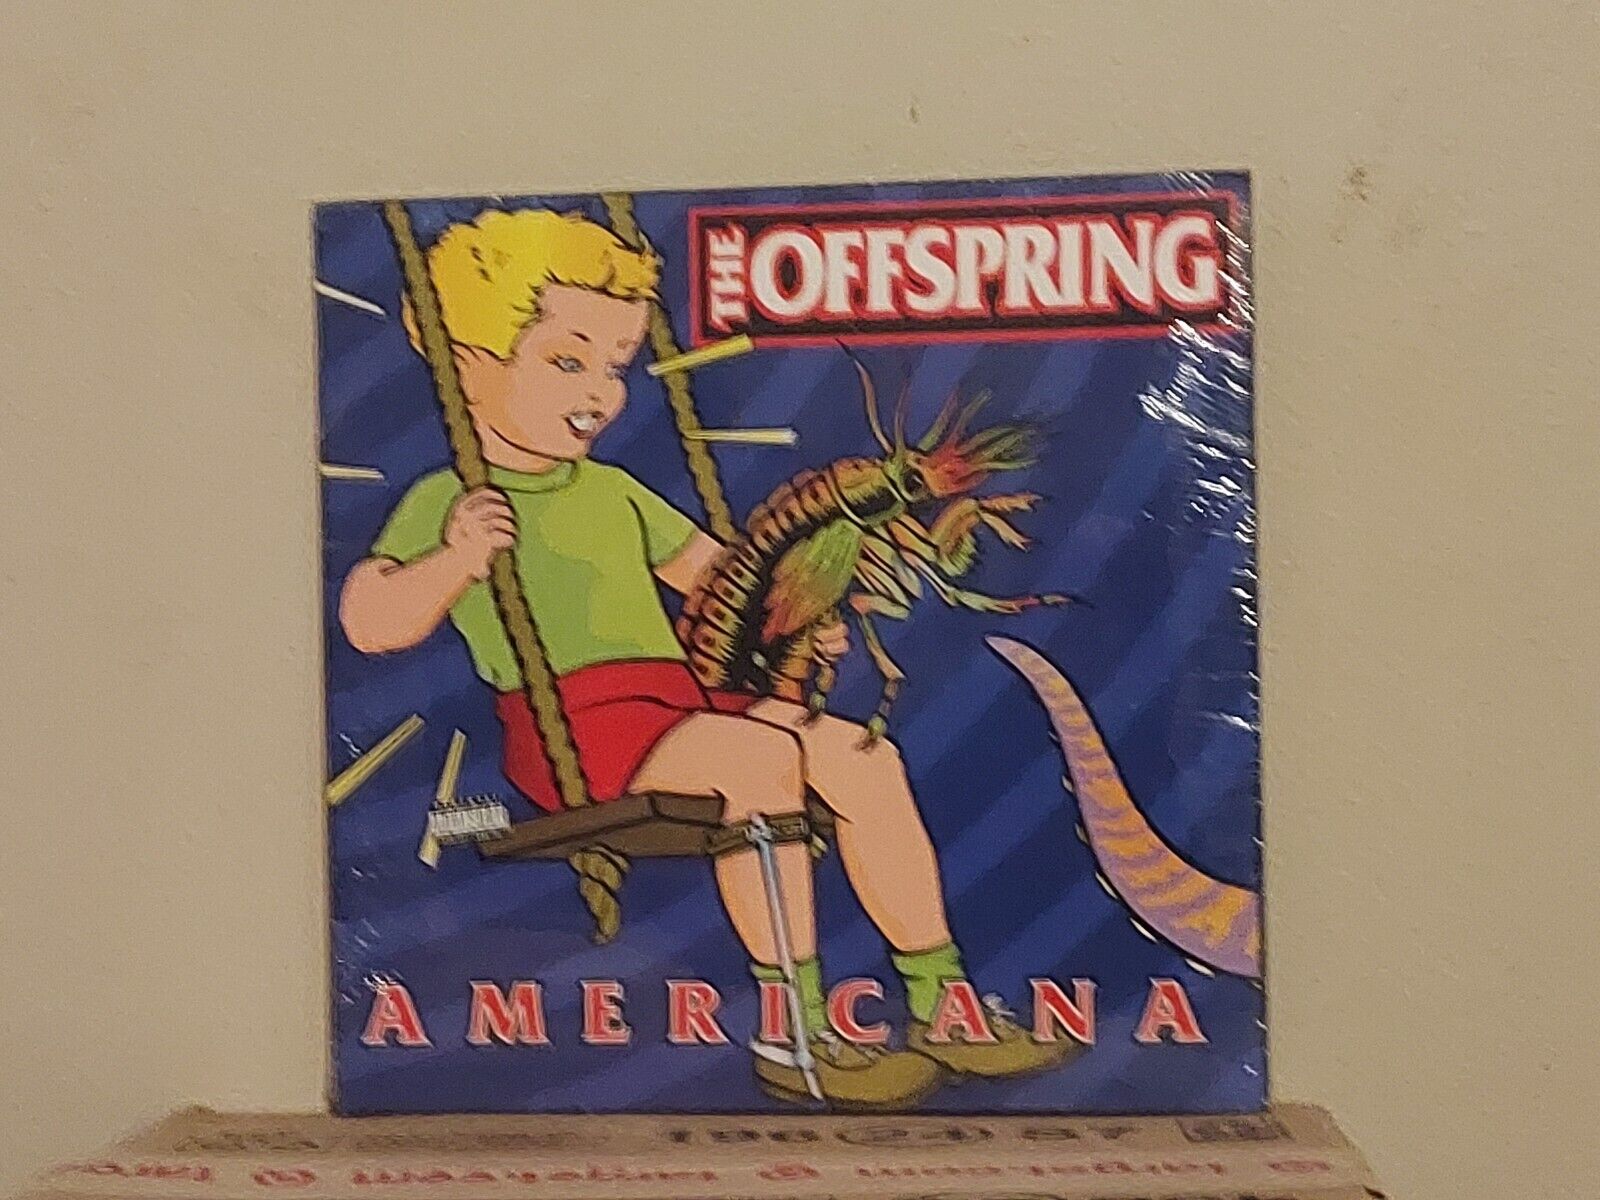 Americana by Offspring (Record, 2019)